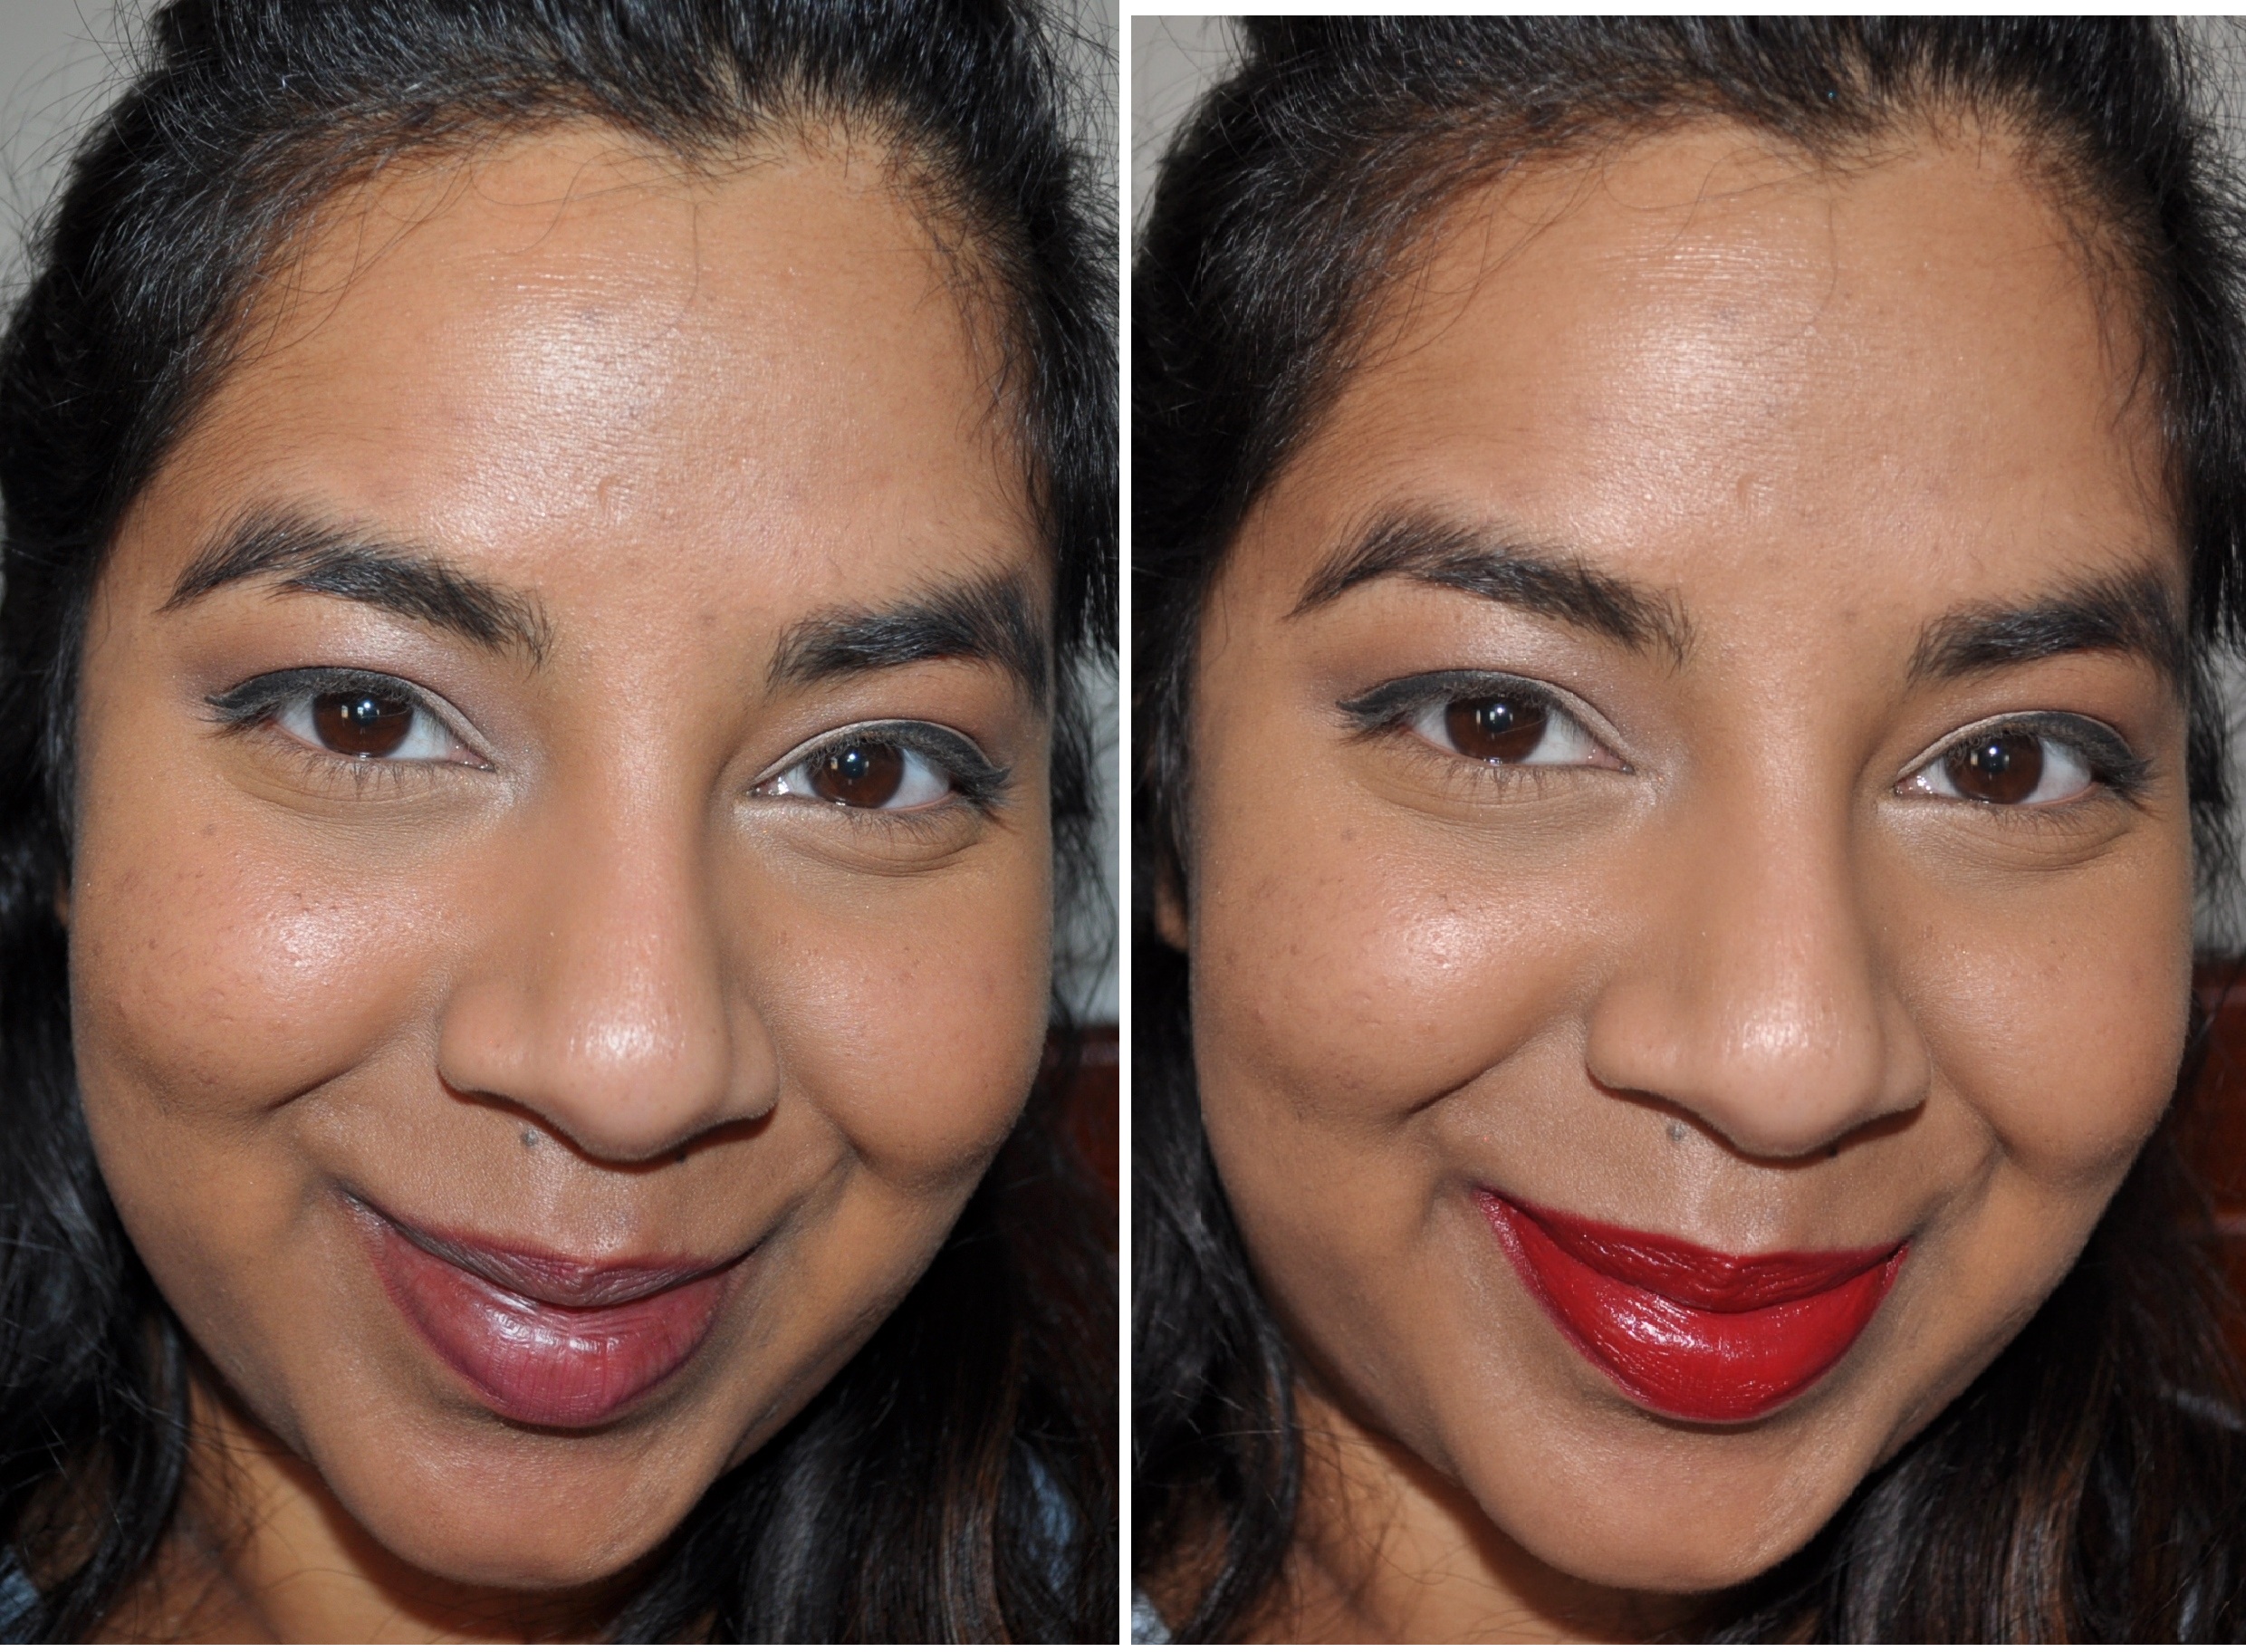 A tale of Dragons and Pirates: Chanel Rouge Allure Luminous in Pirate